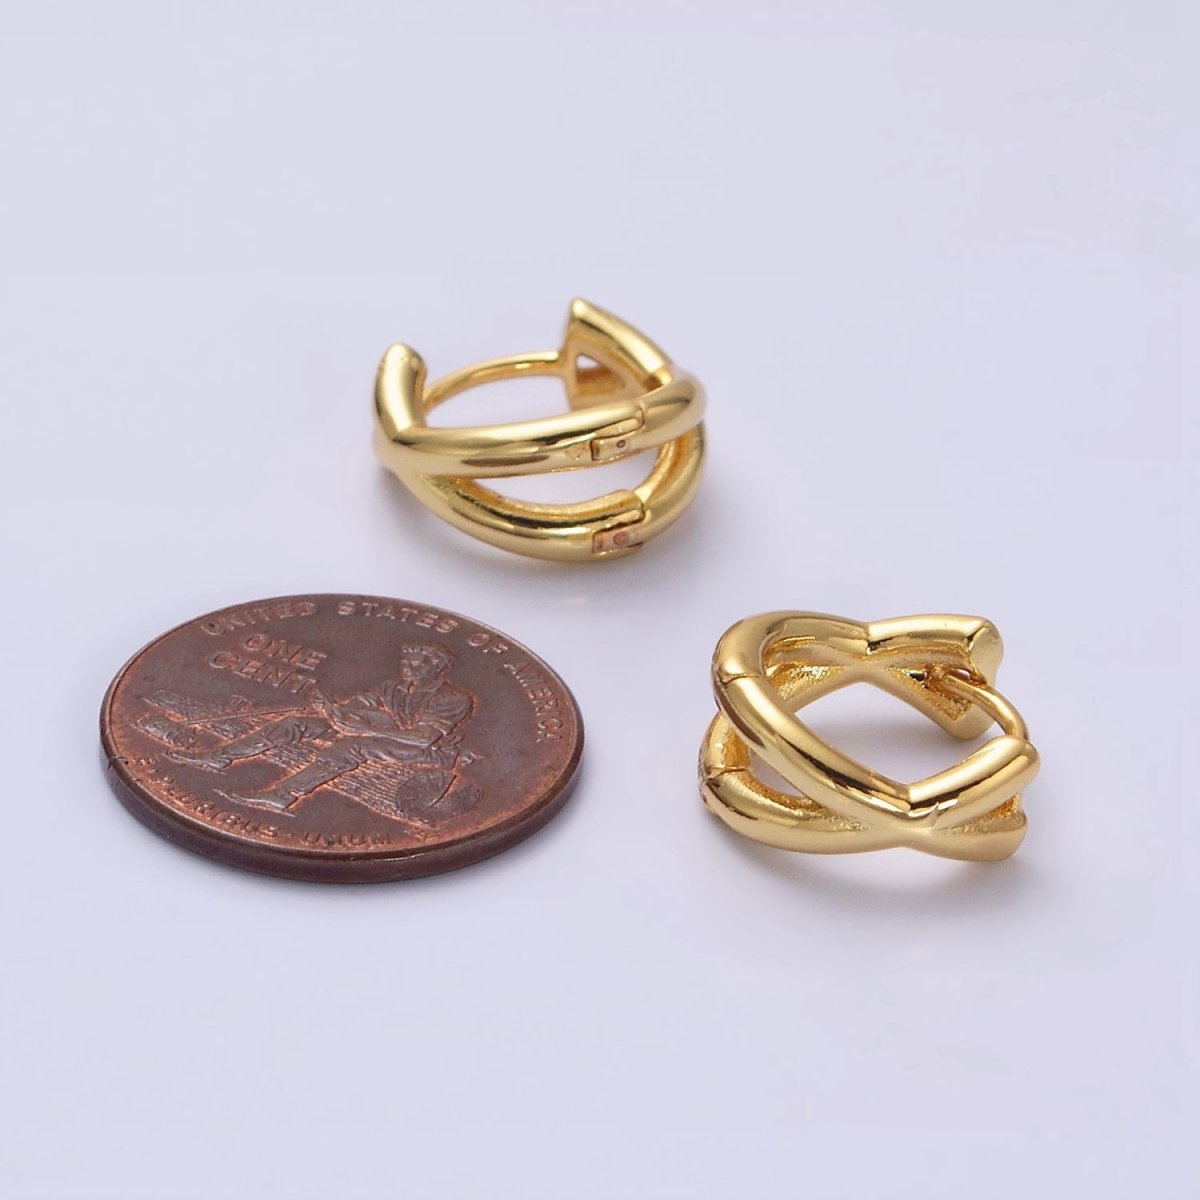 16K Gold Filled Double Band X Claw 12.5mm Huggie Earrings | Y-878 - DLUXCA